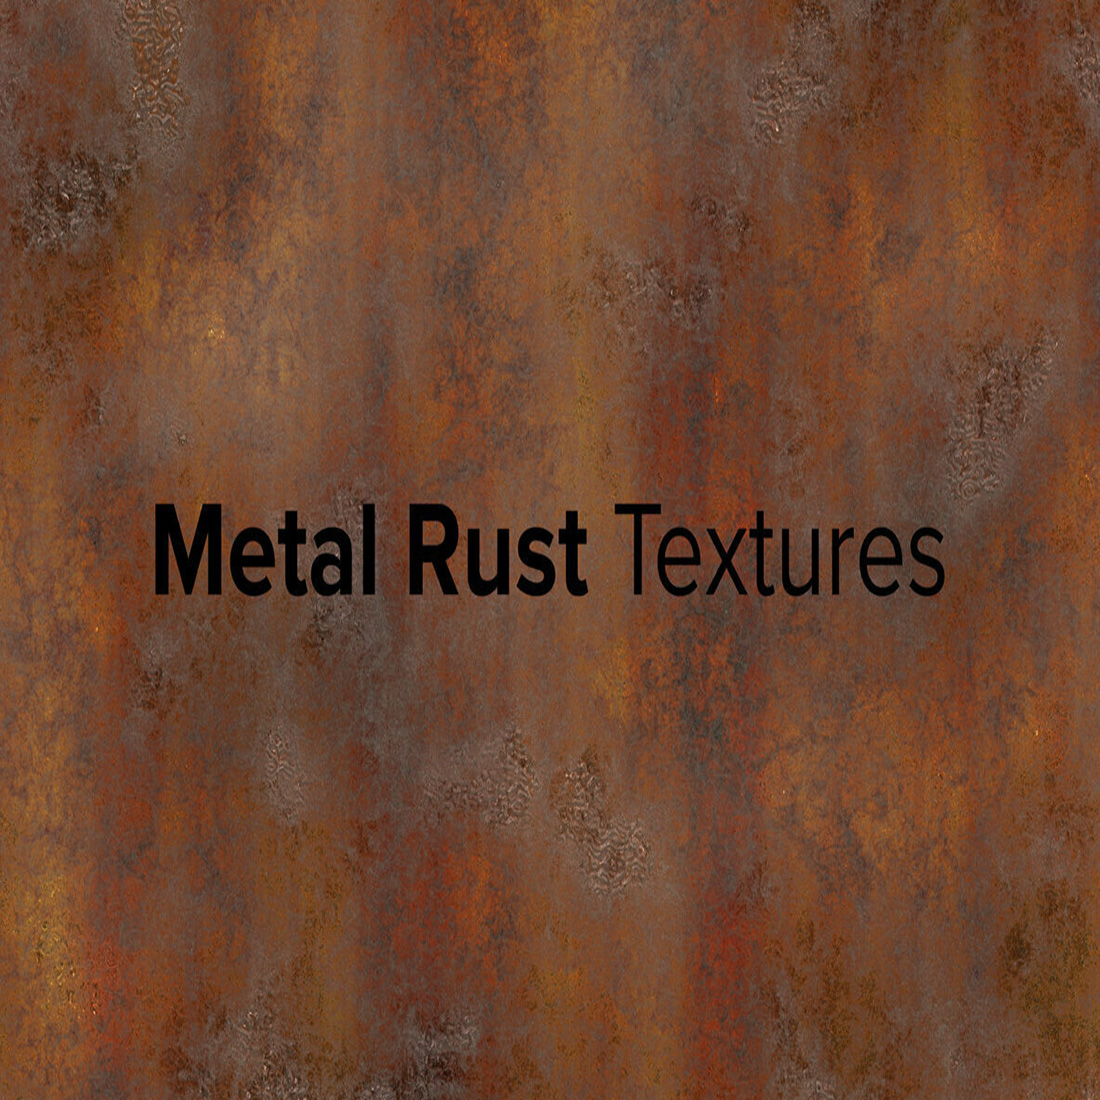 Metal Rust Textures cover image.